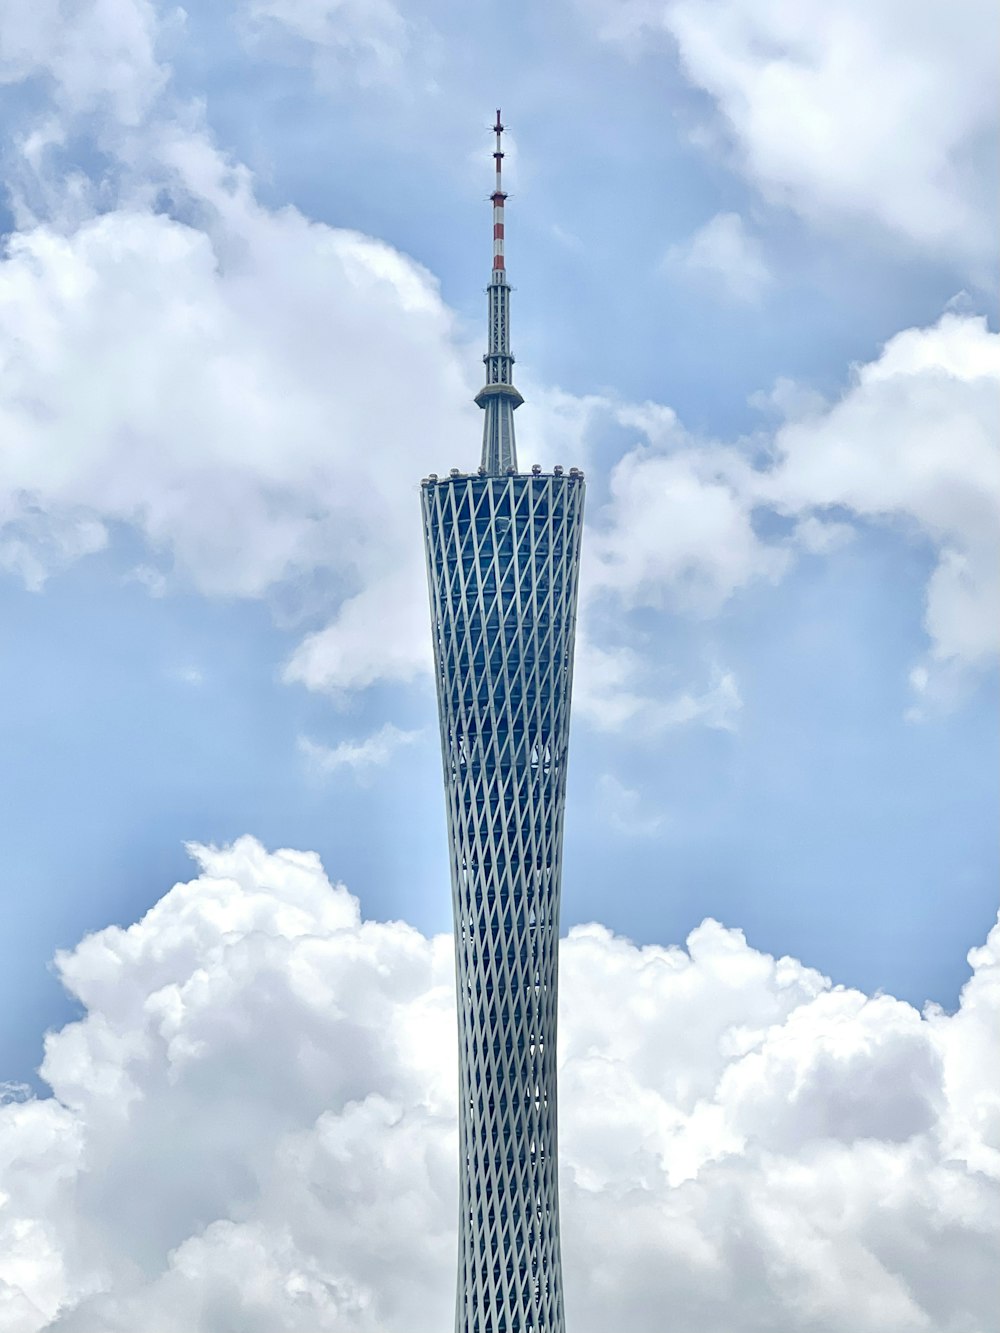 a tall tower with clouds in the background